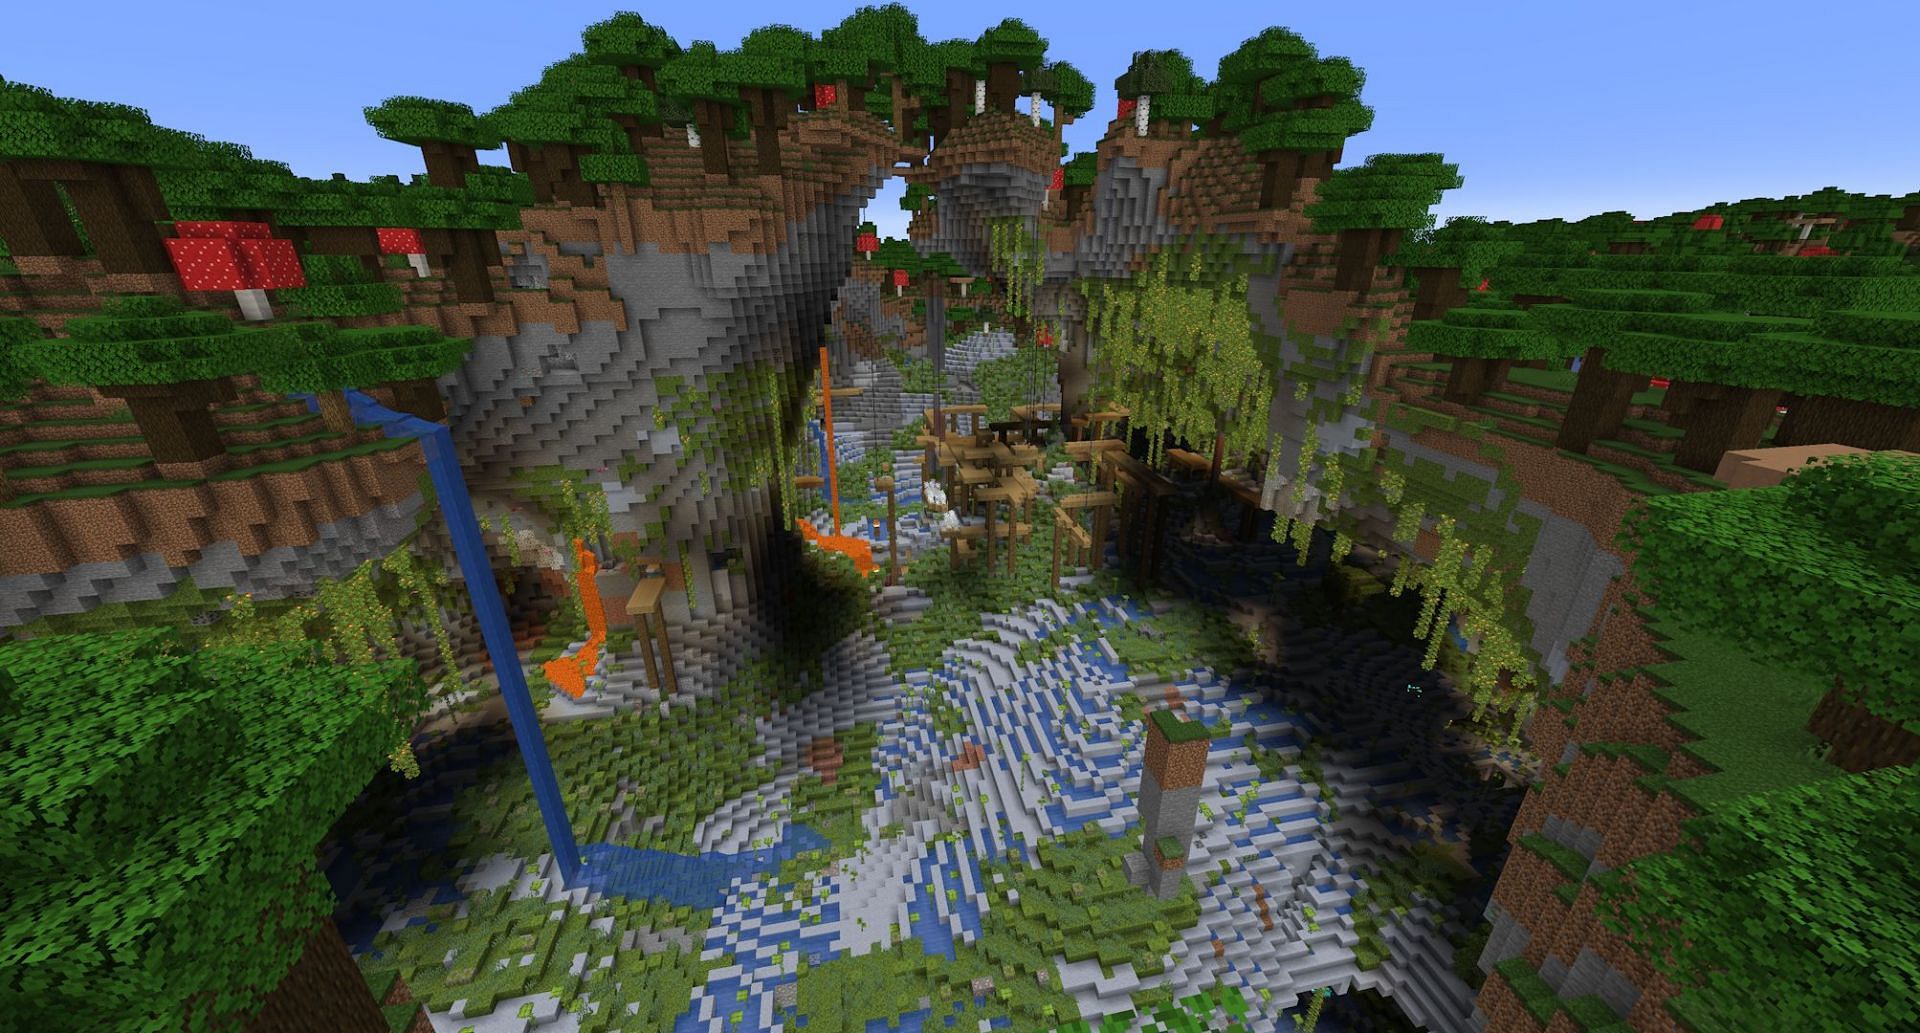 Mineshafts are easier to find with the newer large caves (Image via Mojang)